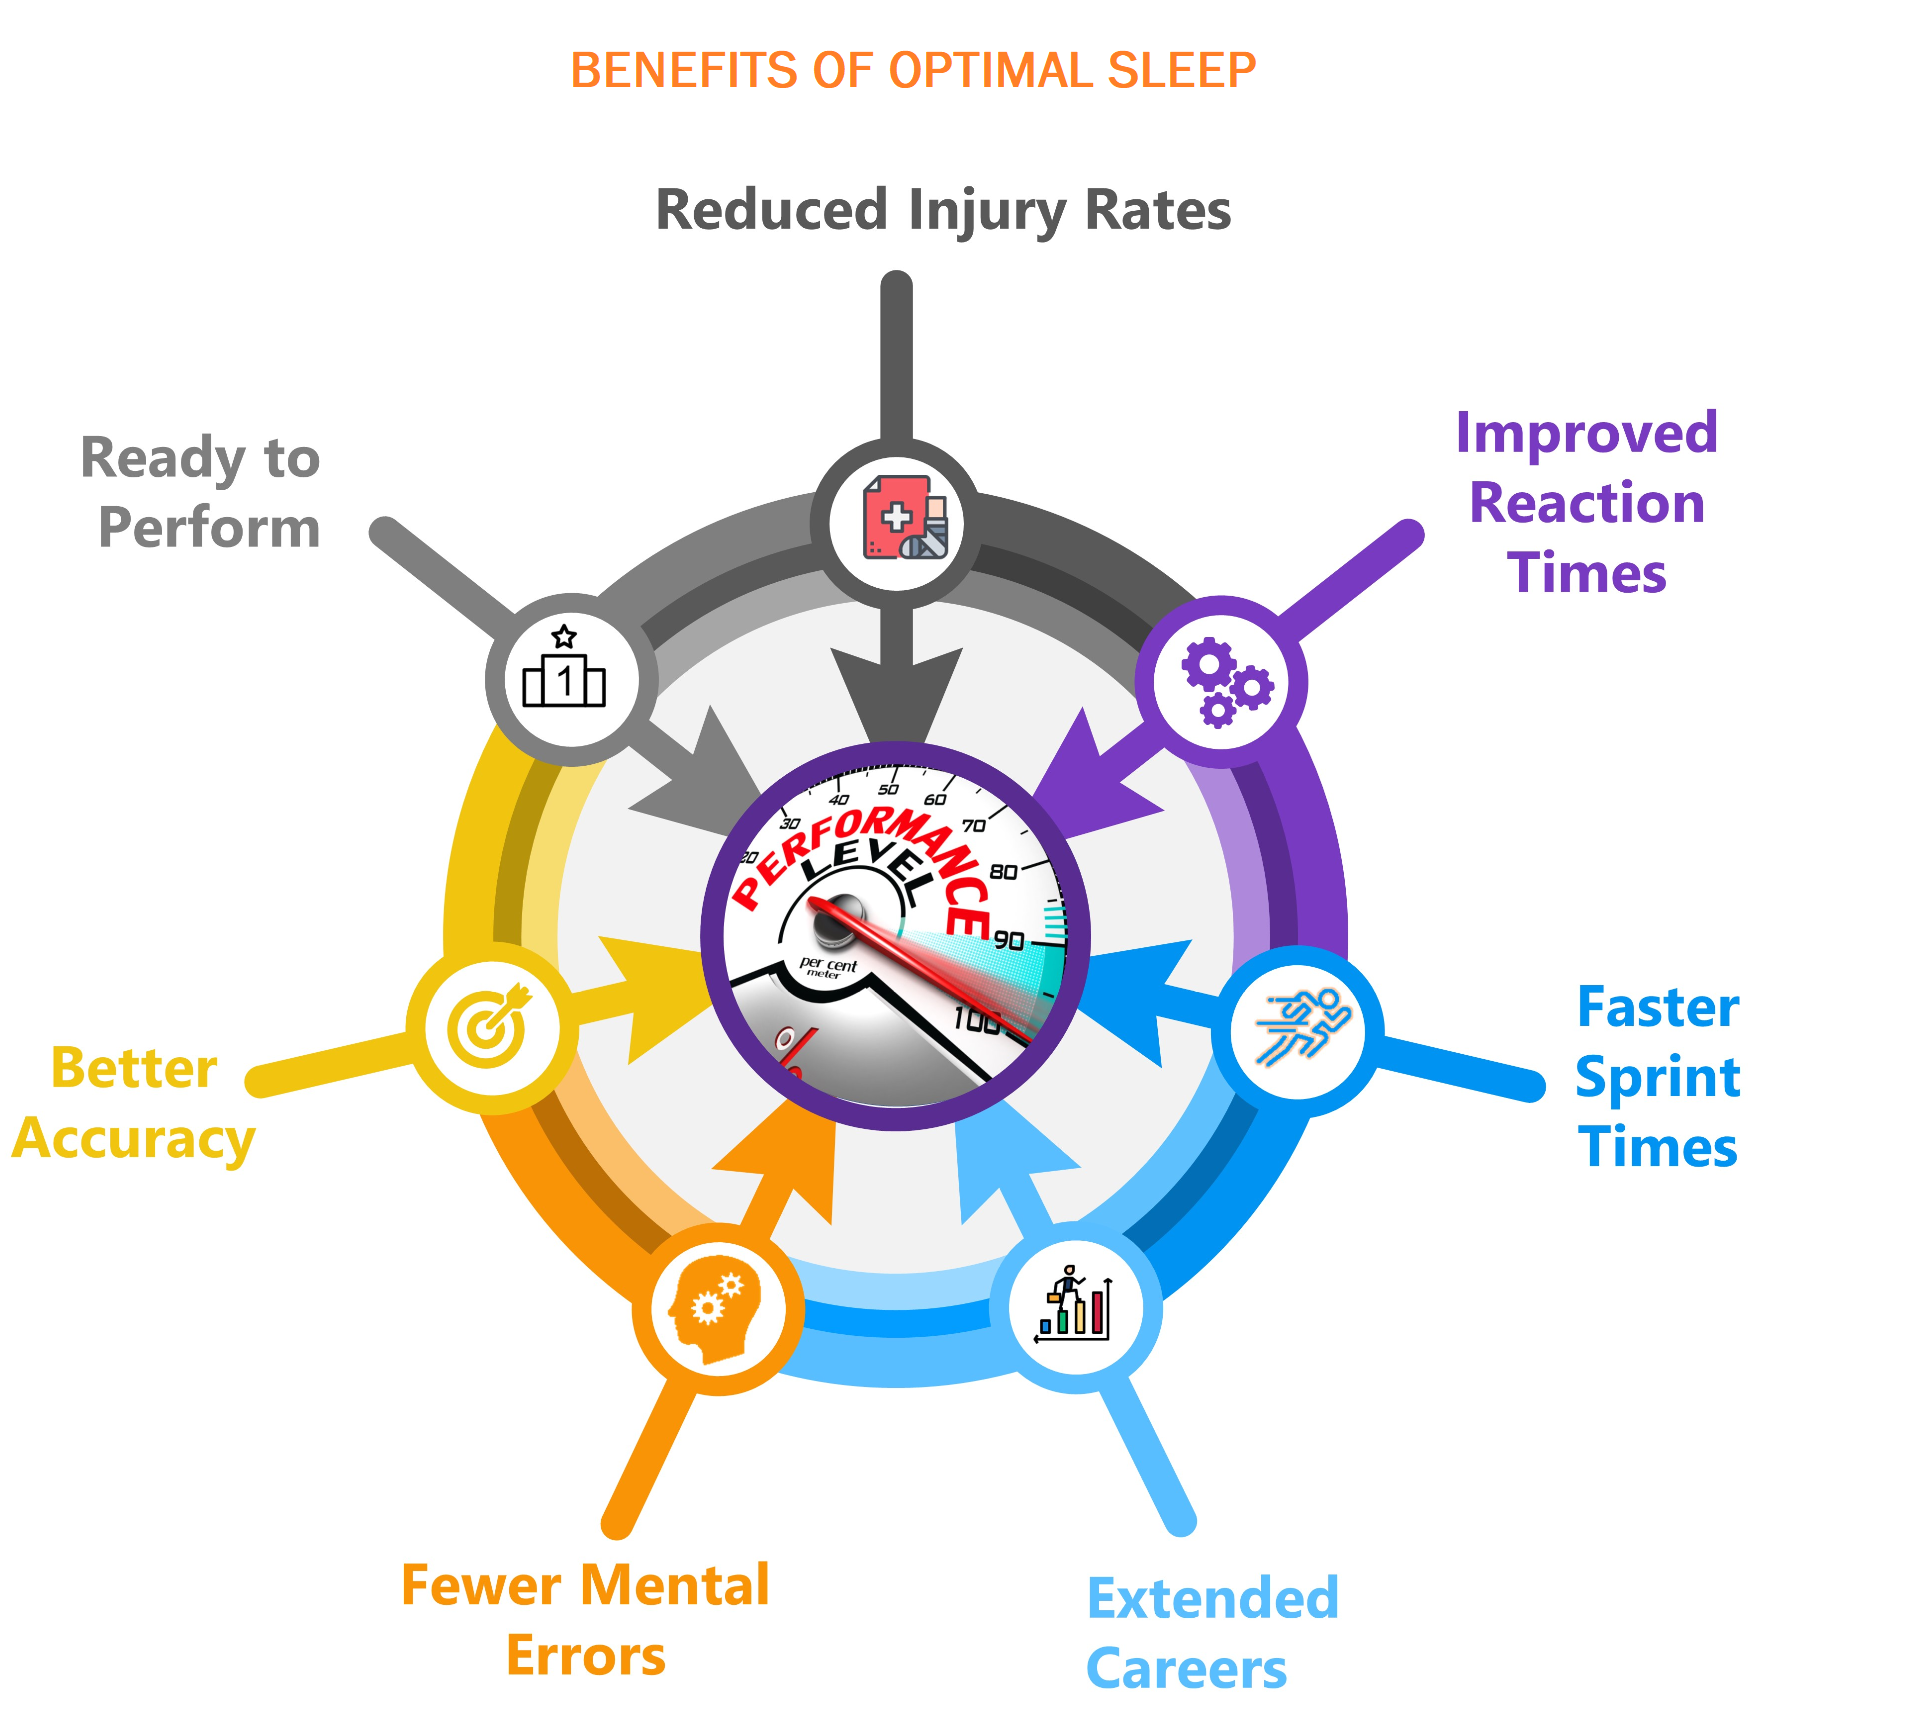 Sleeping Soundly: The Key to Optimal Health and Performance